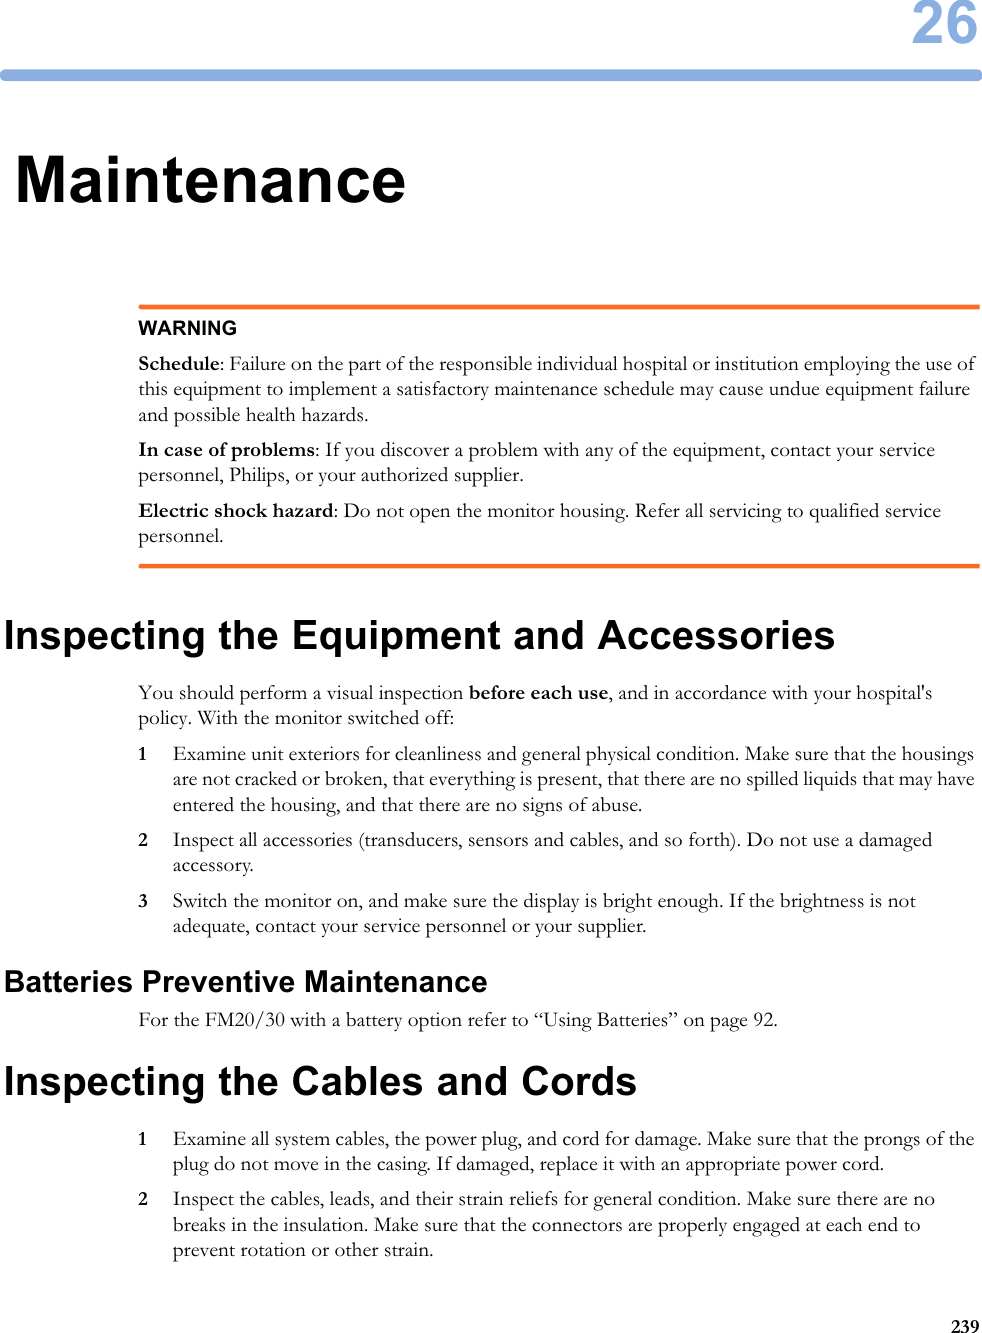 2623926MaintenanceWARNINGSchedule: Failure on the part of the responsible individual hospital or institution employing the use of this equipment to implement a satisfactory maintenance schedule may cause undue equipment failure and possible health hazards.In case of problems: If you discover a problem with any of the equipment, contact your service personnel, Philips, or your authorized supplier.Electric shock hazard: Do not open the monitor housing. Refer all servicing to qualified service personnel.Inspecting the Equipment and AccessoriesYou should perform a visual inspection before each use, and in accordance with your hospital&apos;s policy. With the monitor switched off:1Examine unit exteriors for cleanliness and general physical condition. Make sure that the housings are not cracked or broken, that everything is present, that there are no spilled liquids that may have entered the housing, and that there are no signs of abuse.2Inspect all accessories (transducers, sensors and cables, and so forth). Do not use a damaged accessory.3Switch the monitor on, and make sure the display is bright enough. If the brightness is not adequate, contact your service personnel or your supplier.Batteries Preventive MaintenanceFor the FM20/30 with a battery option refer to “Using Batteries” on page 92.Inspecting the Cables and Cords1Examine all system cables, the power plug, and cord for damage. Make sure that the prongs of the plug do not move in the casing. If damaged, replace it with an appropriate power cord.2Inspect the cables, leads, and their strain reliefs for general condition. Make sure there are no breaks in the insulation. Make sure that the connectors are properly engaged at each end to prevent rotation or other strain.